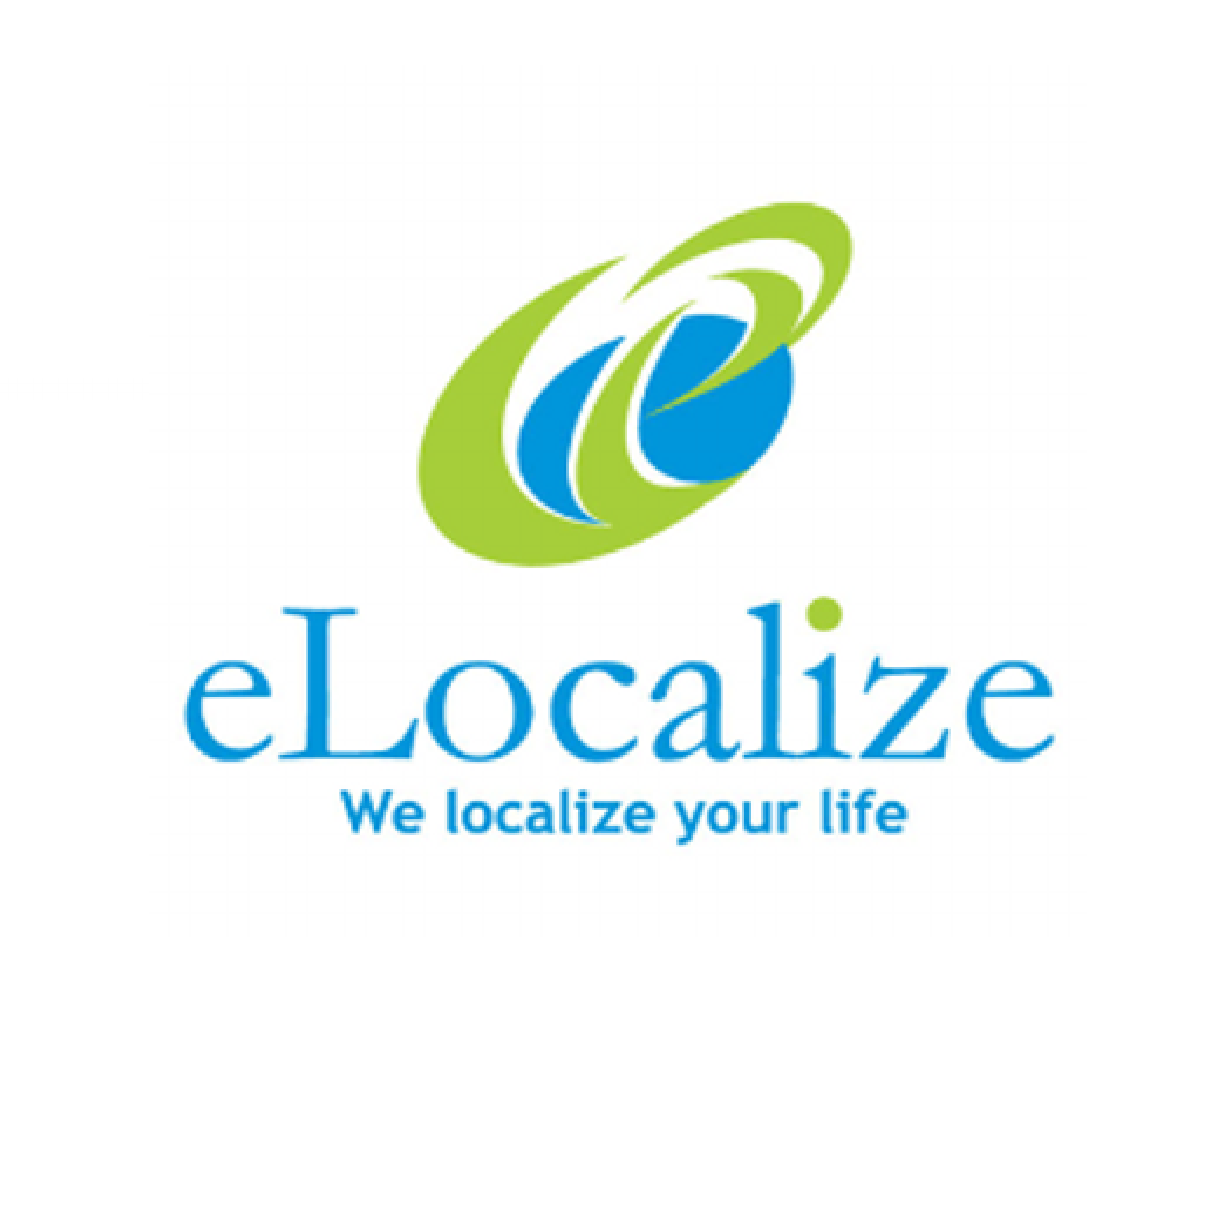 eLocalize